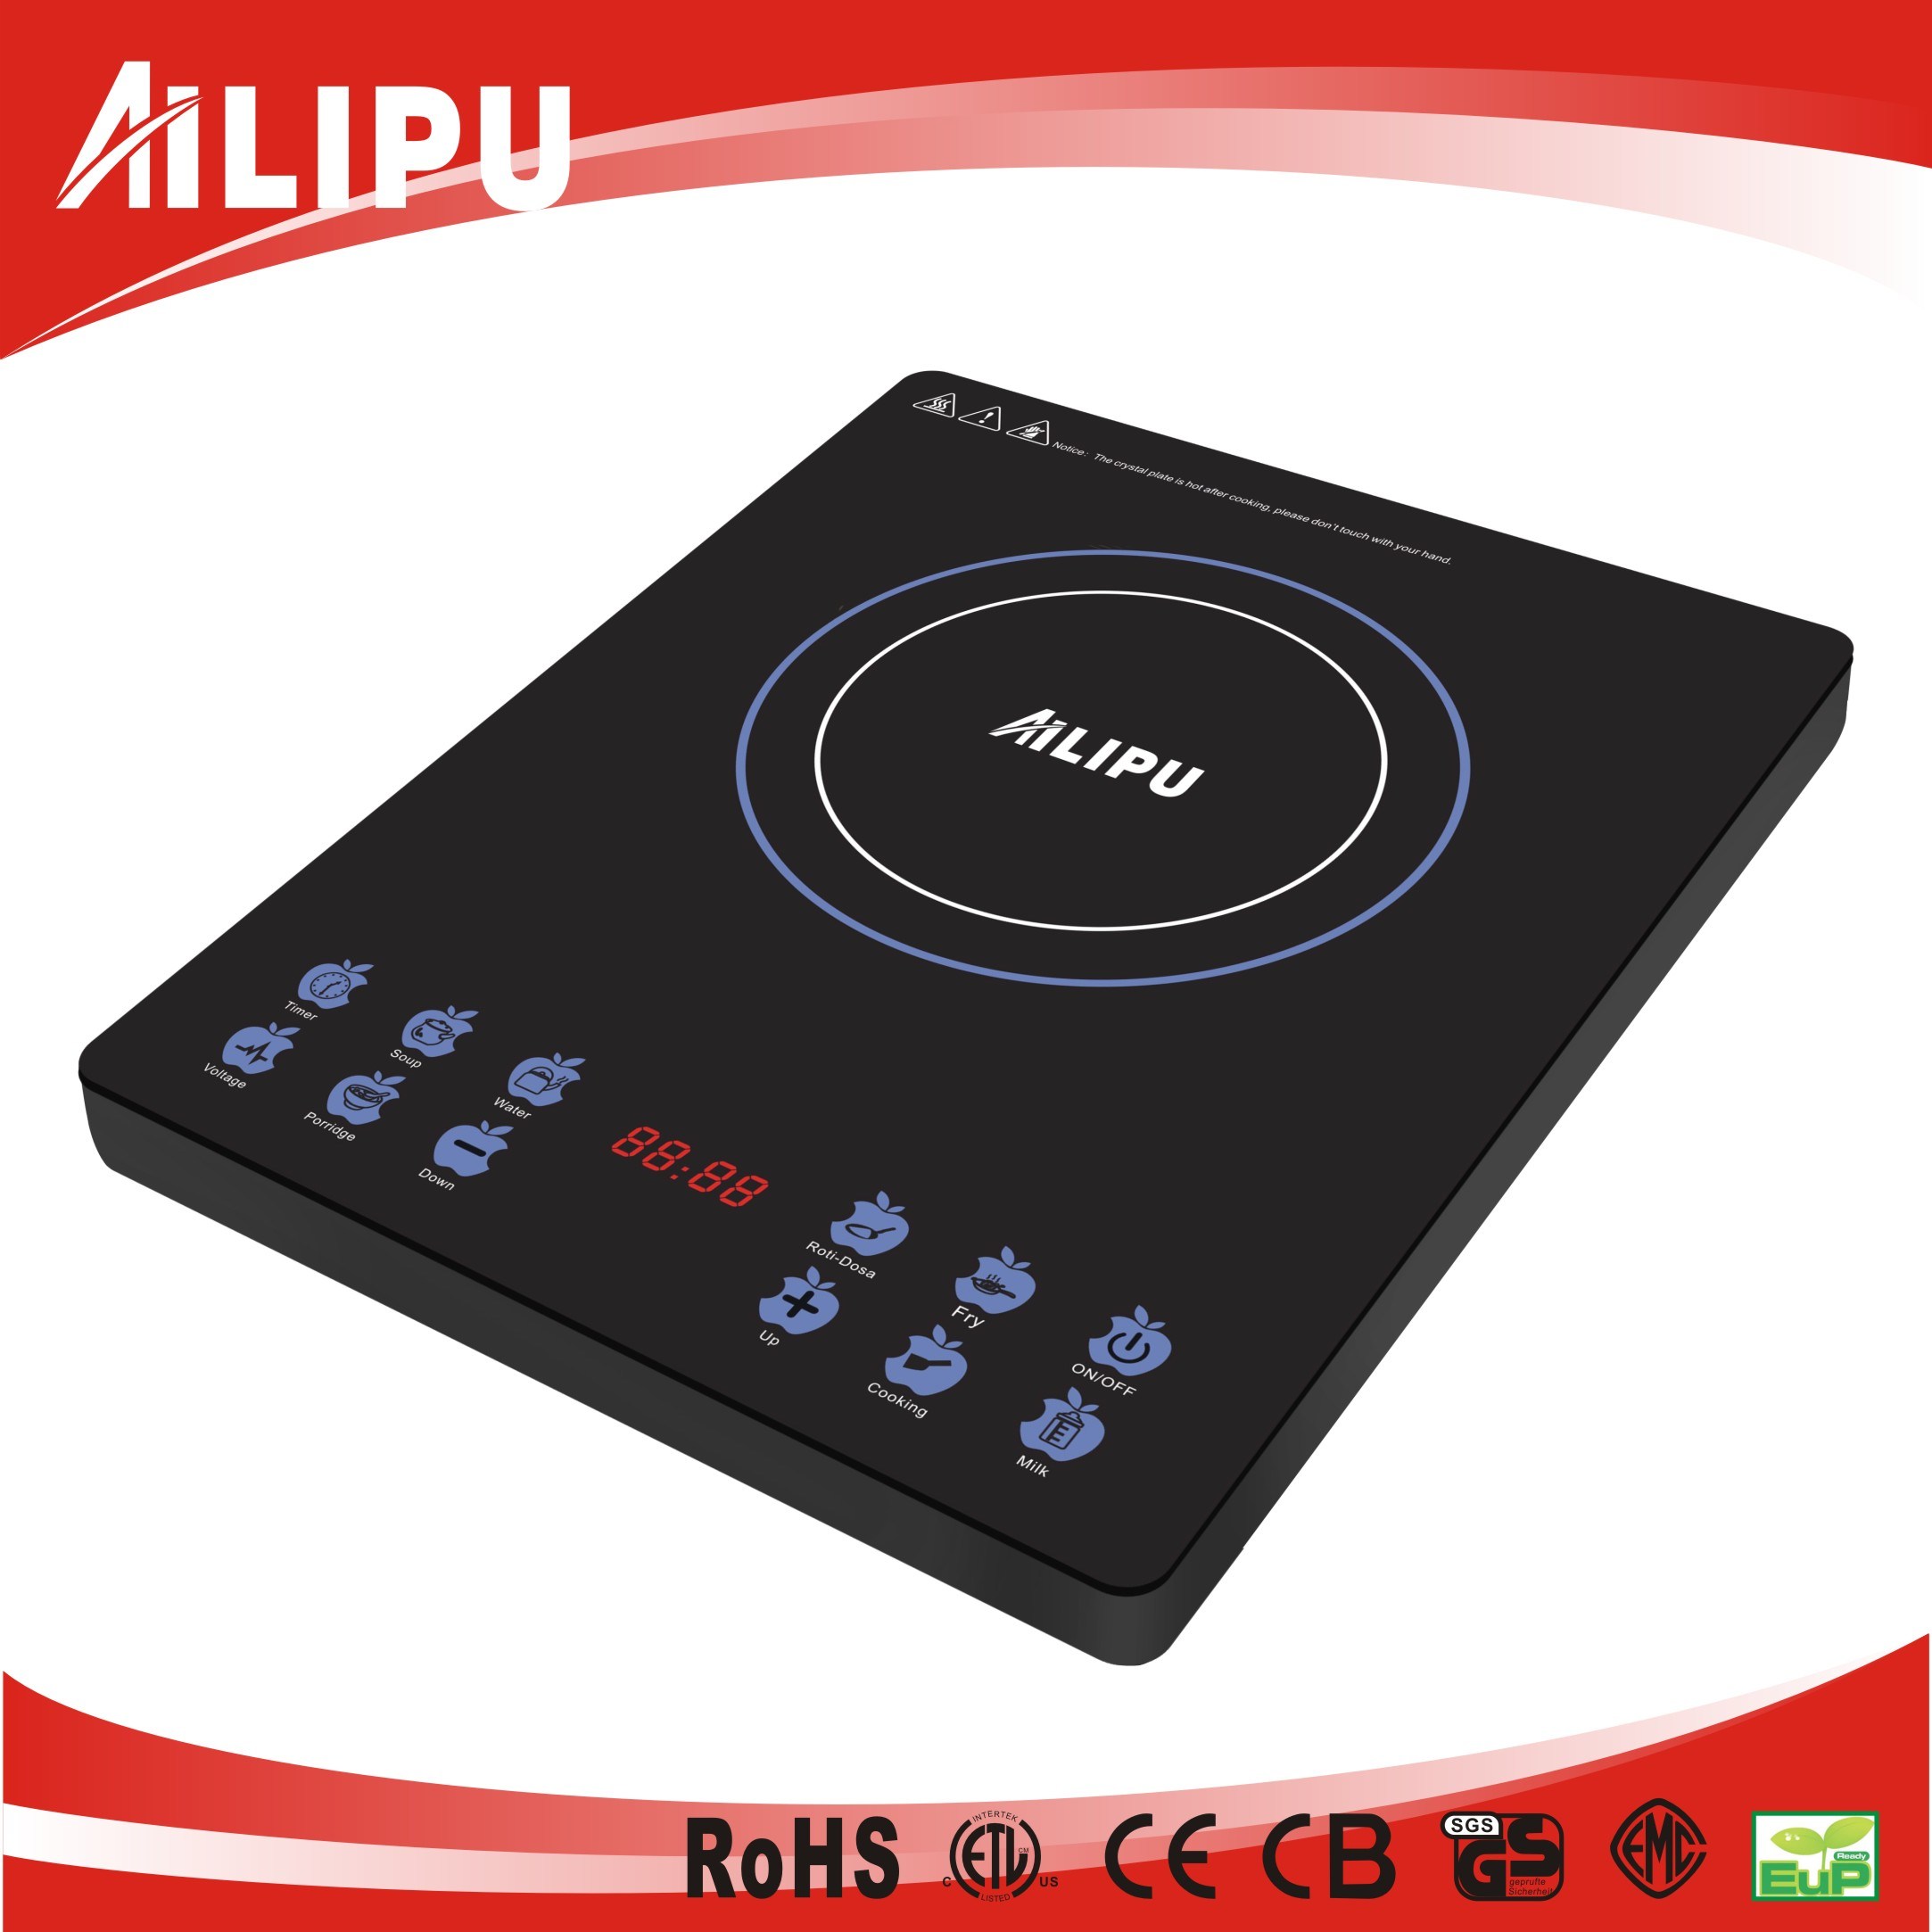 New Product of Kitchenware, Big Induction Cooker, Electric Cookware, Induction Plate, Touch Control (SM-A11C)